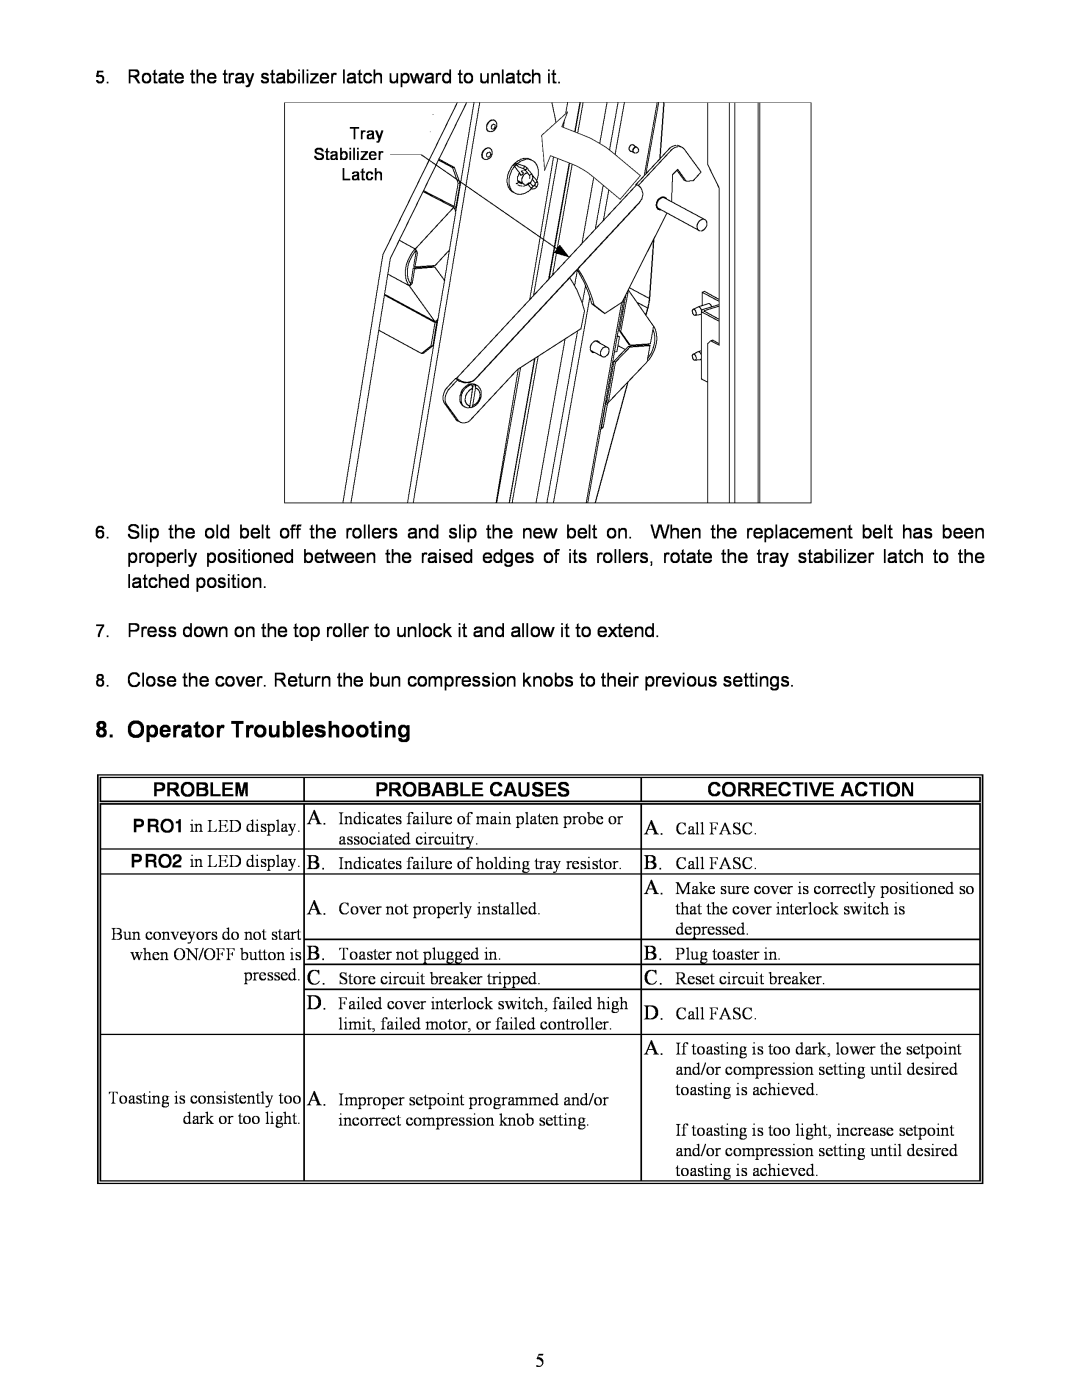 Frymaster CT16 operation manual Operator Troubleshooting, Problem, Probable Causes, Corrective Action 